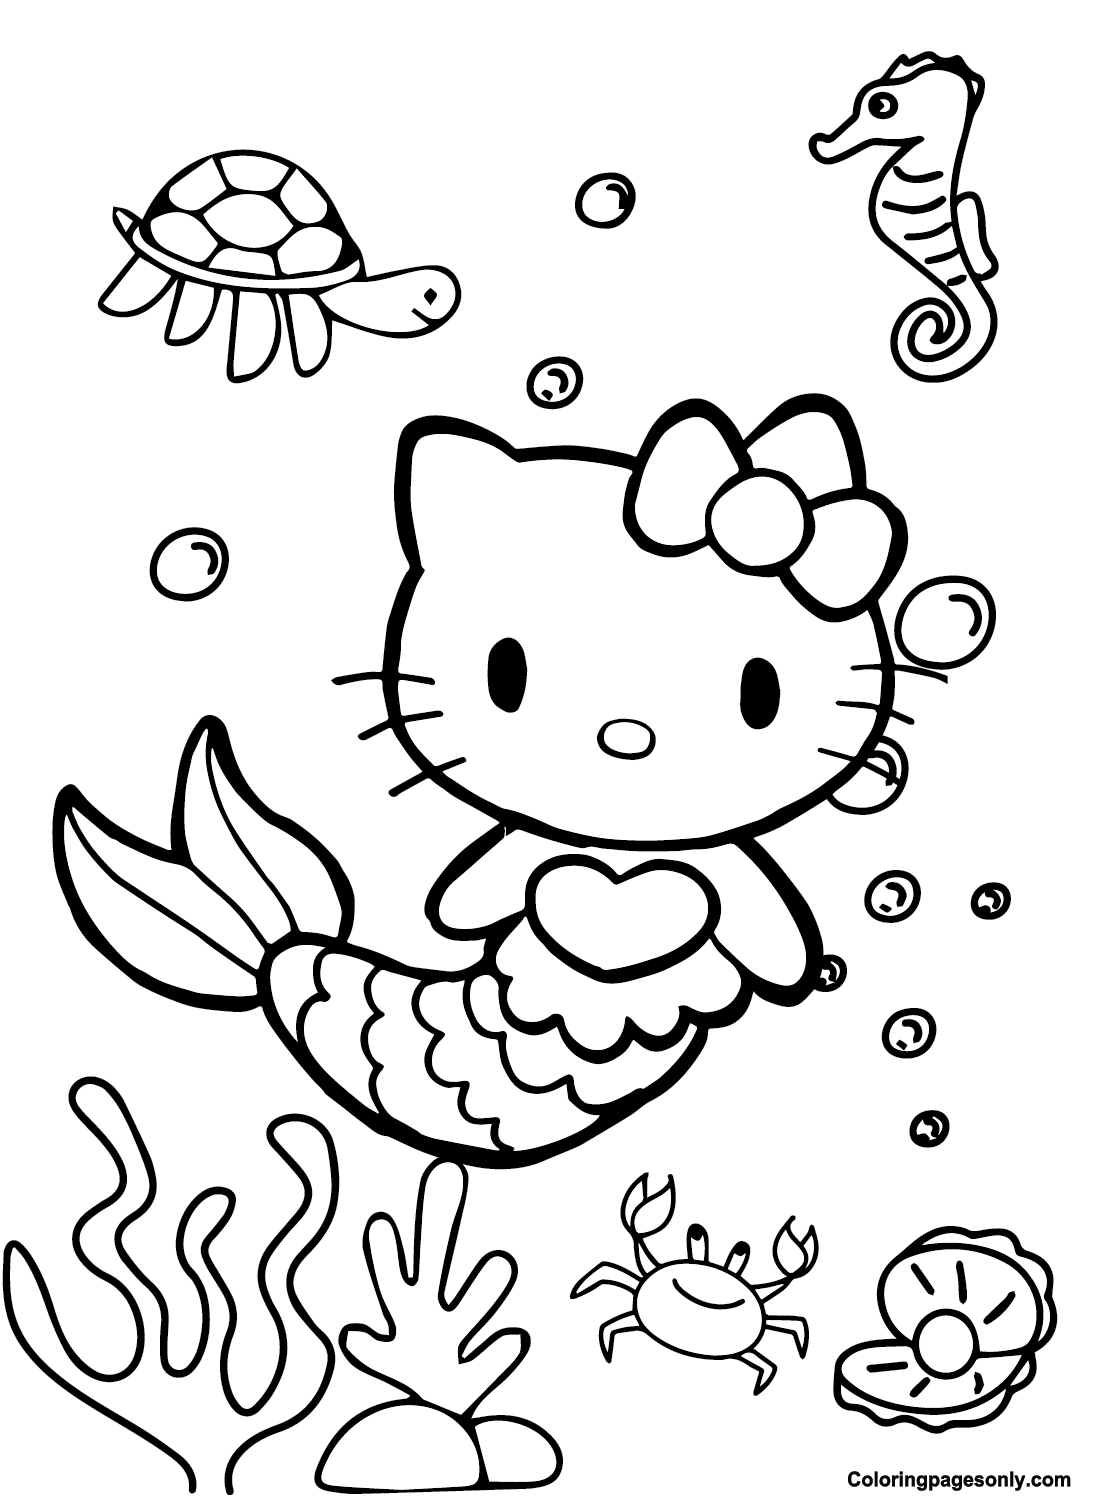 hello kitty dancing coloring pages